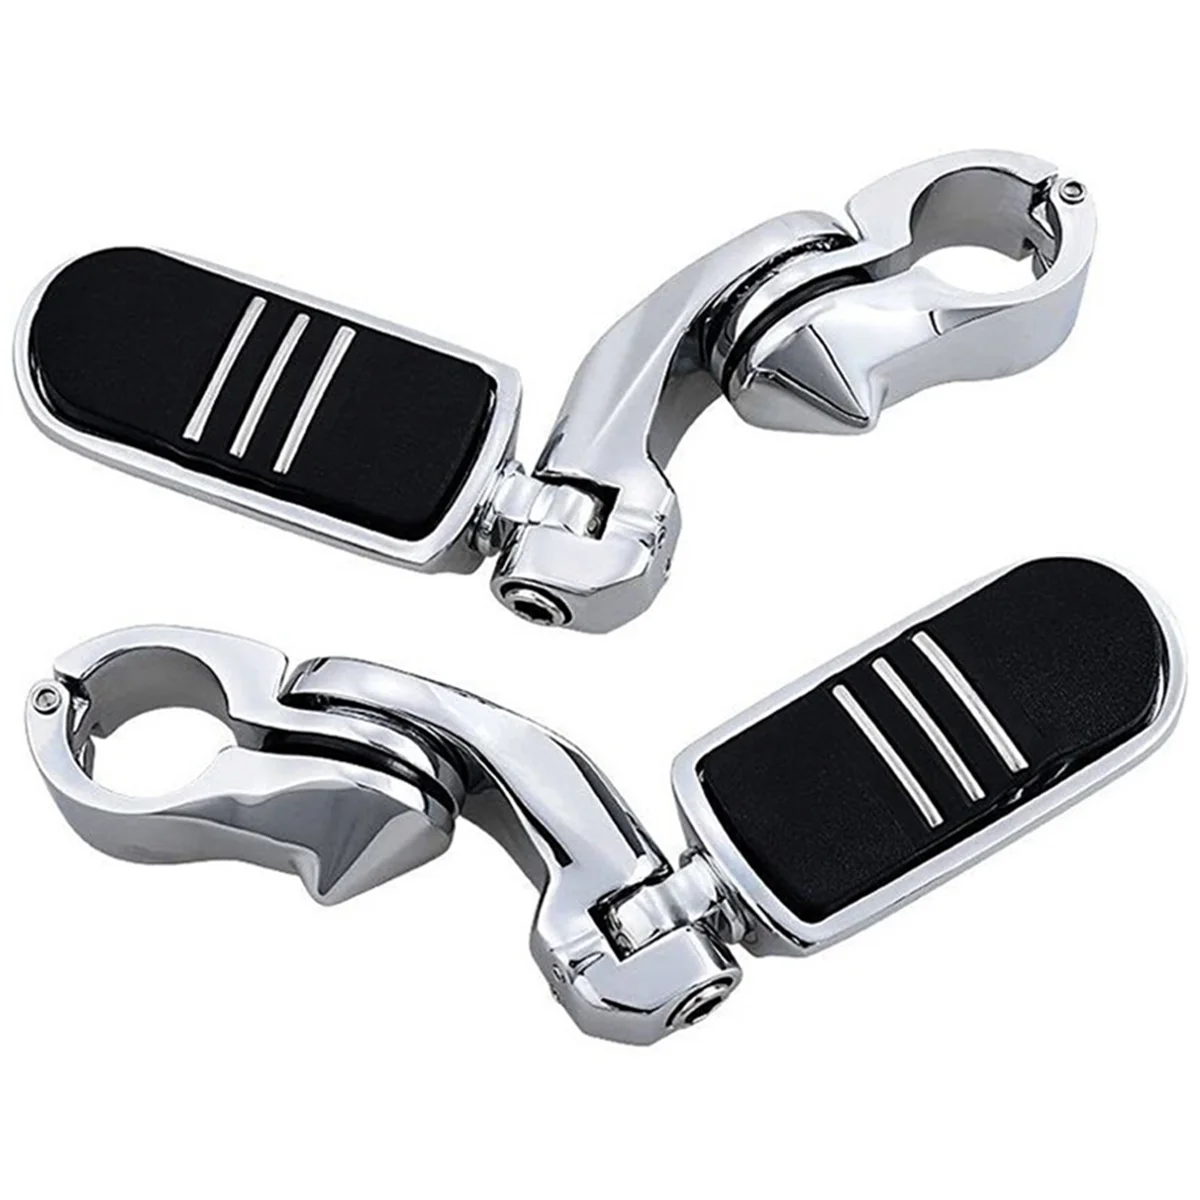 For Harley Davidson Streamliner Touring Road Ride 1-1/4 Inch Motorcycle ... - $103.39